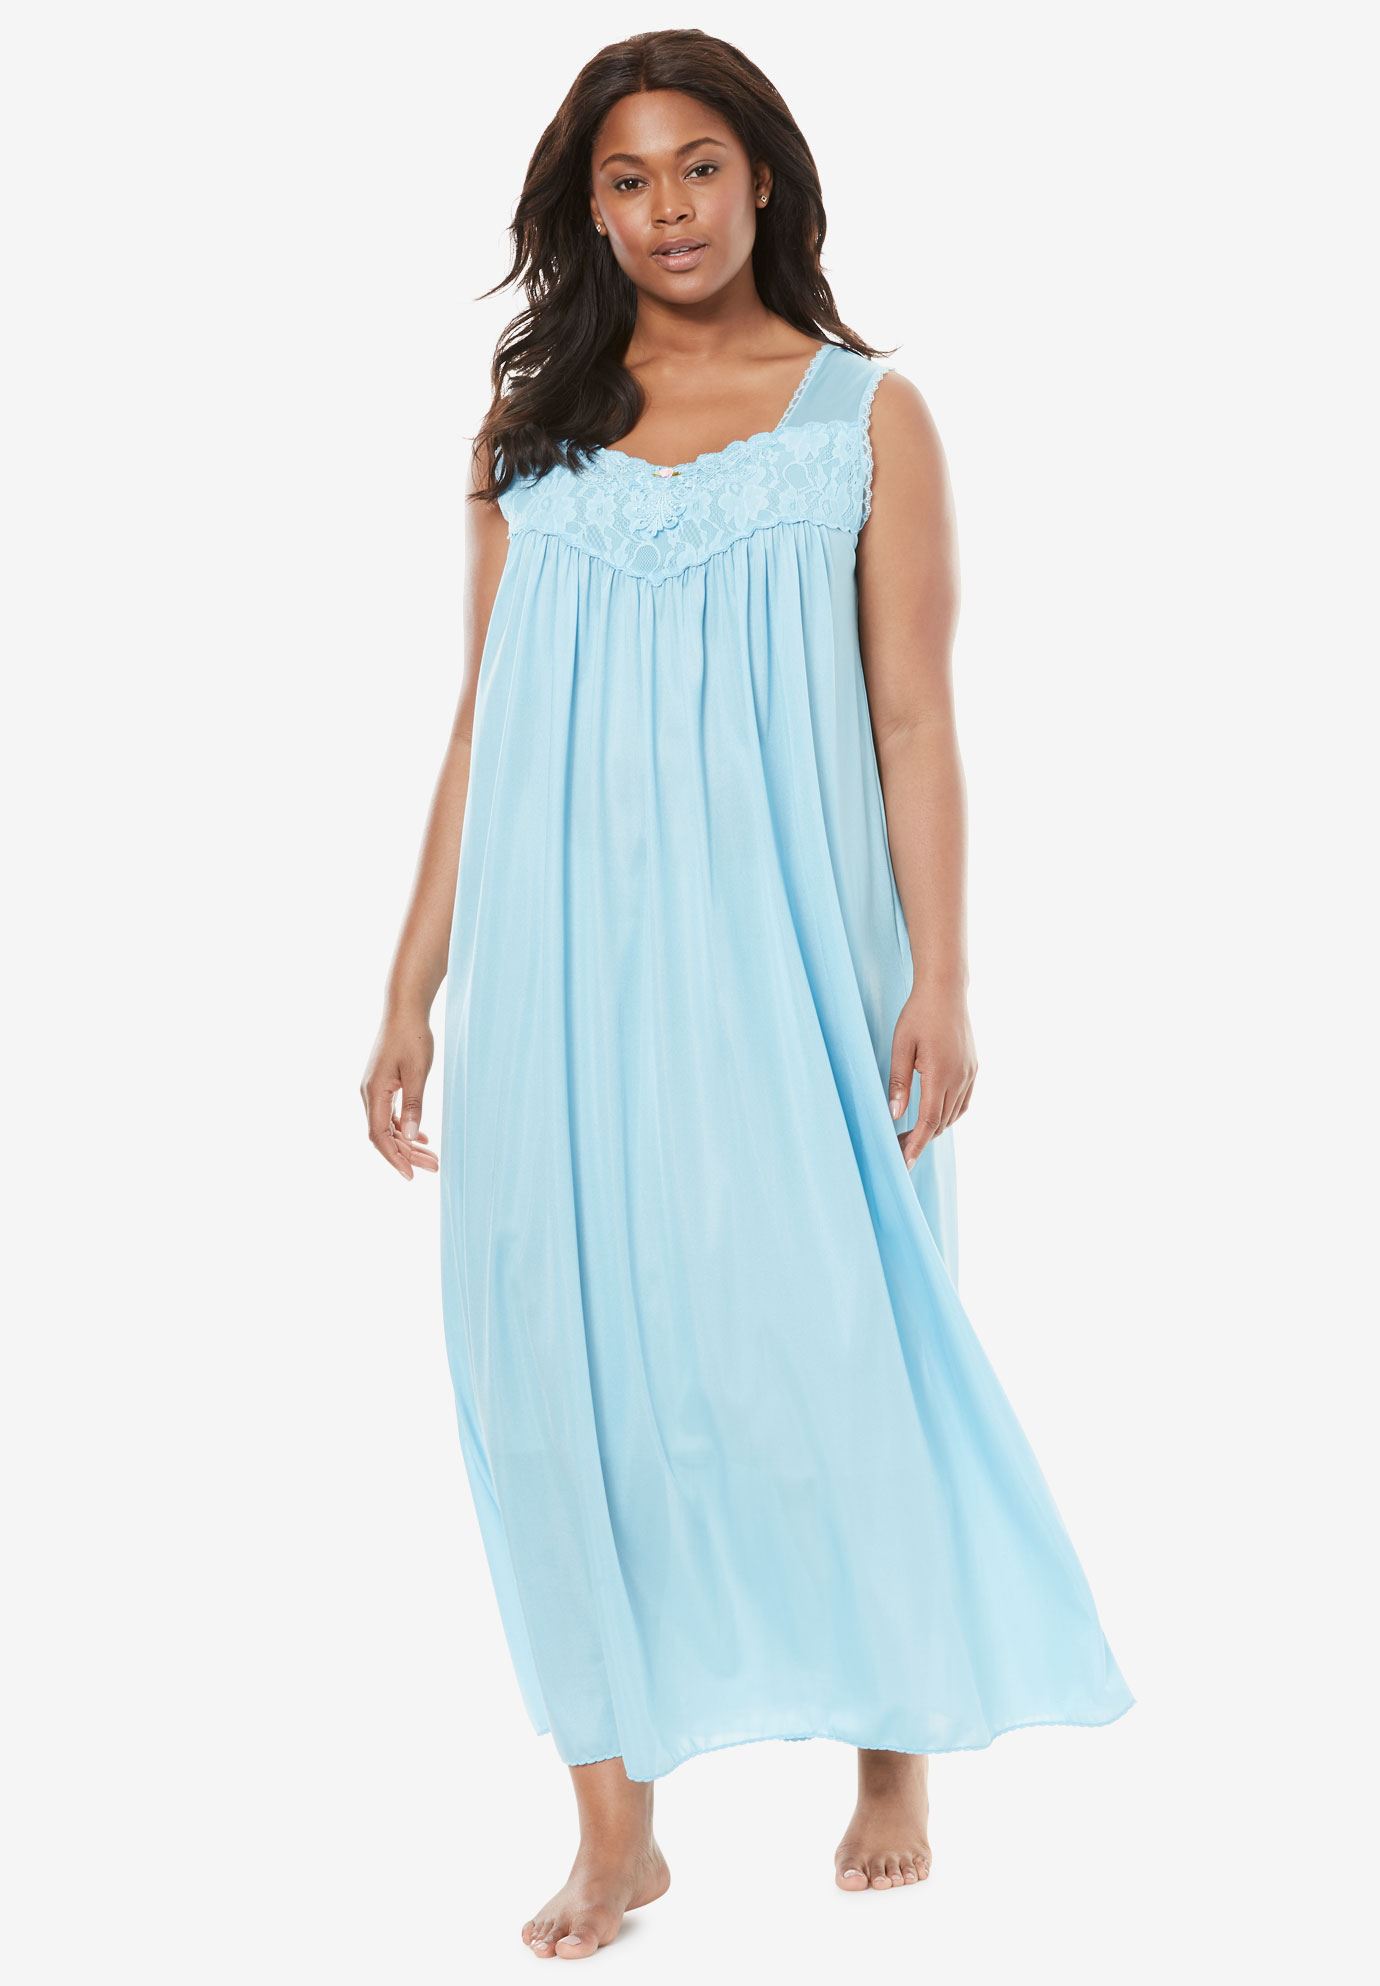 Long Tricot Knit Nightgown by Only Necessities® | Plus Size Nightgowns | Woman Within